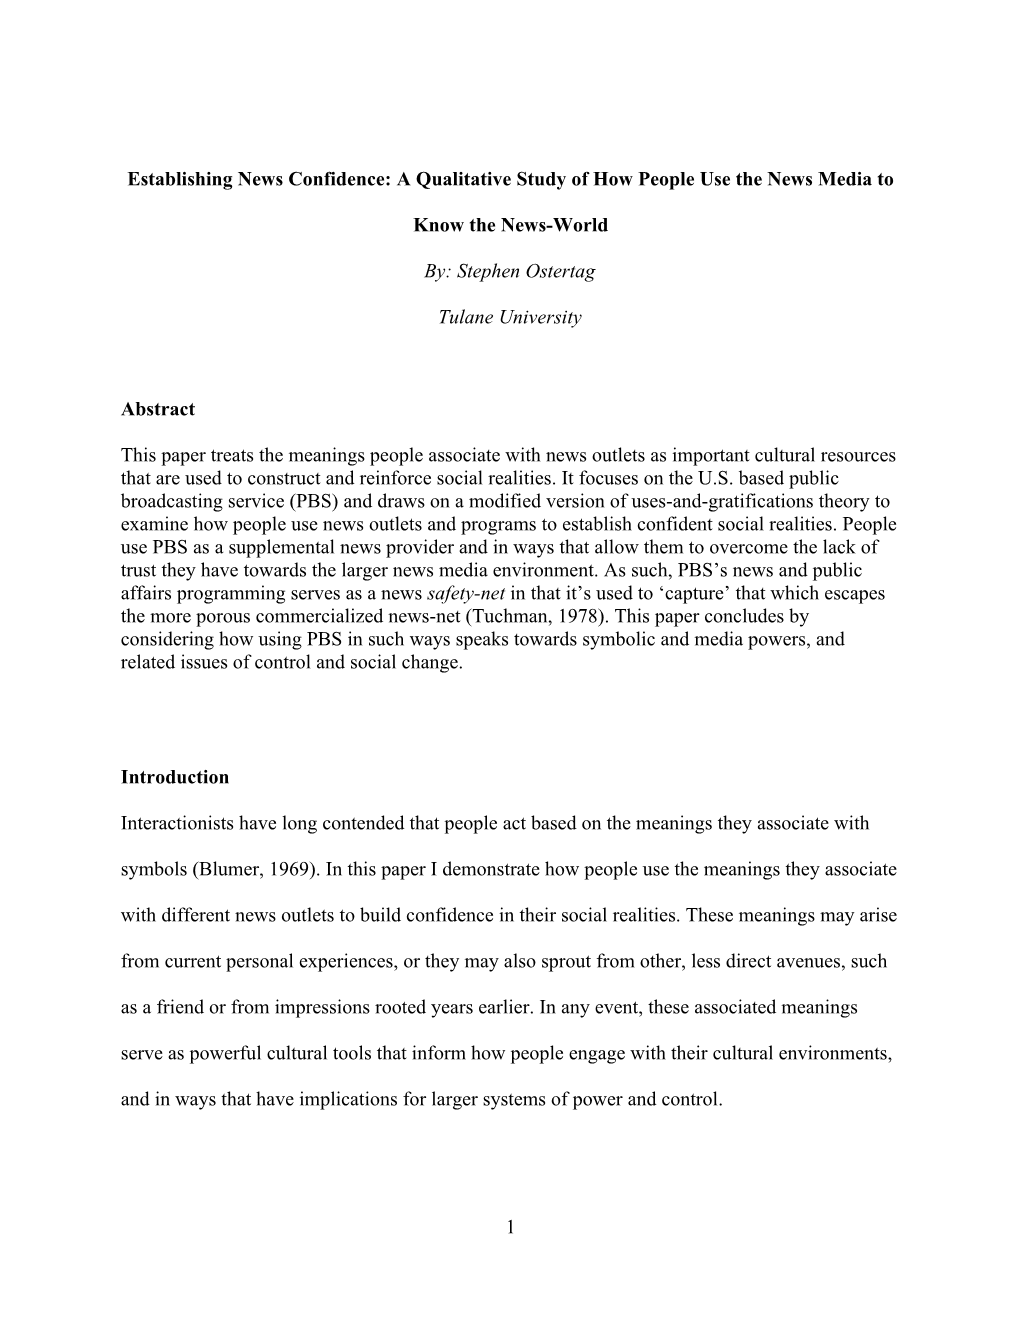 Establishing News Confidence: a Qualitative Study of How People Use the News Media To